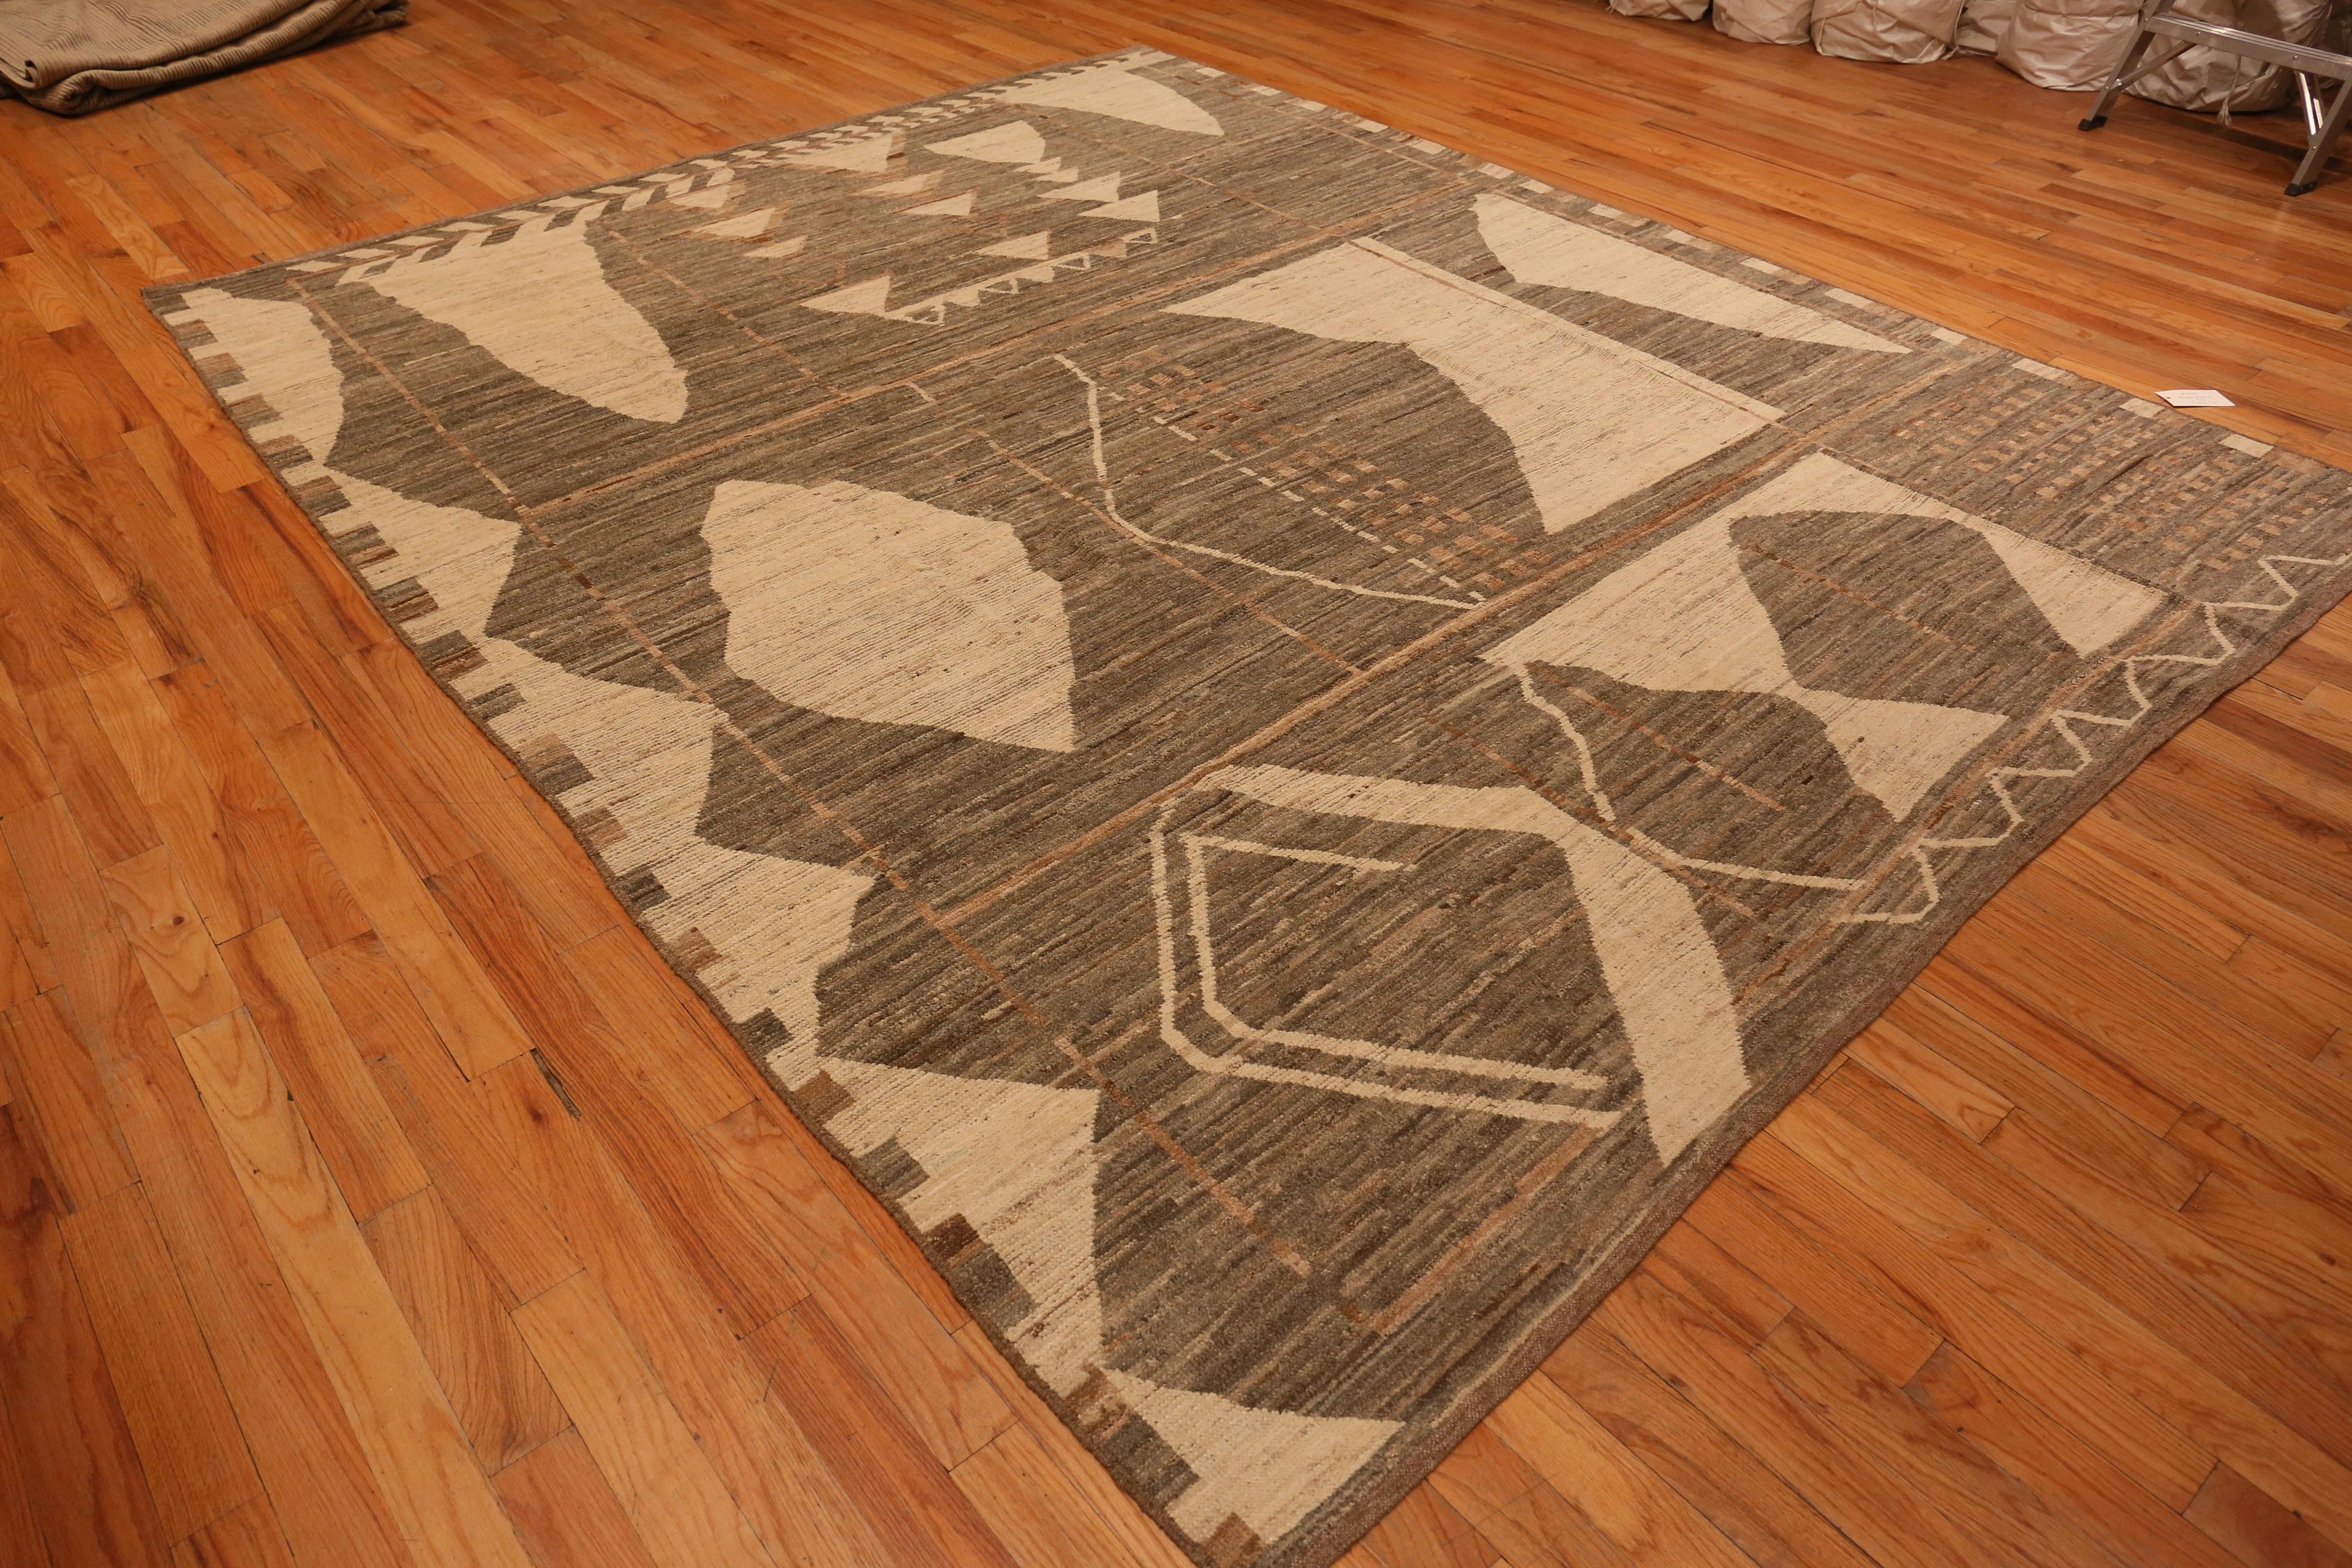 Primitive Design Modern Moroccan Rug, Country of Origin: Afghanistan. Circa date: Modern. Size: 9 ft 8 in x 11 ft 10 in (2.95 m x 3.61 m)